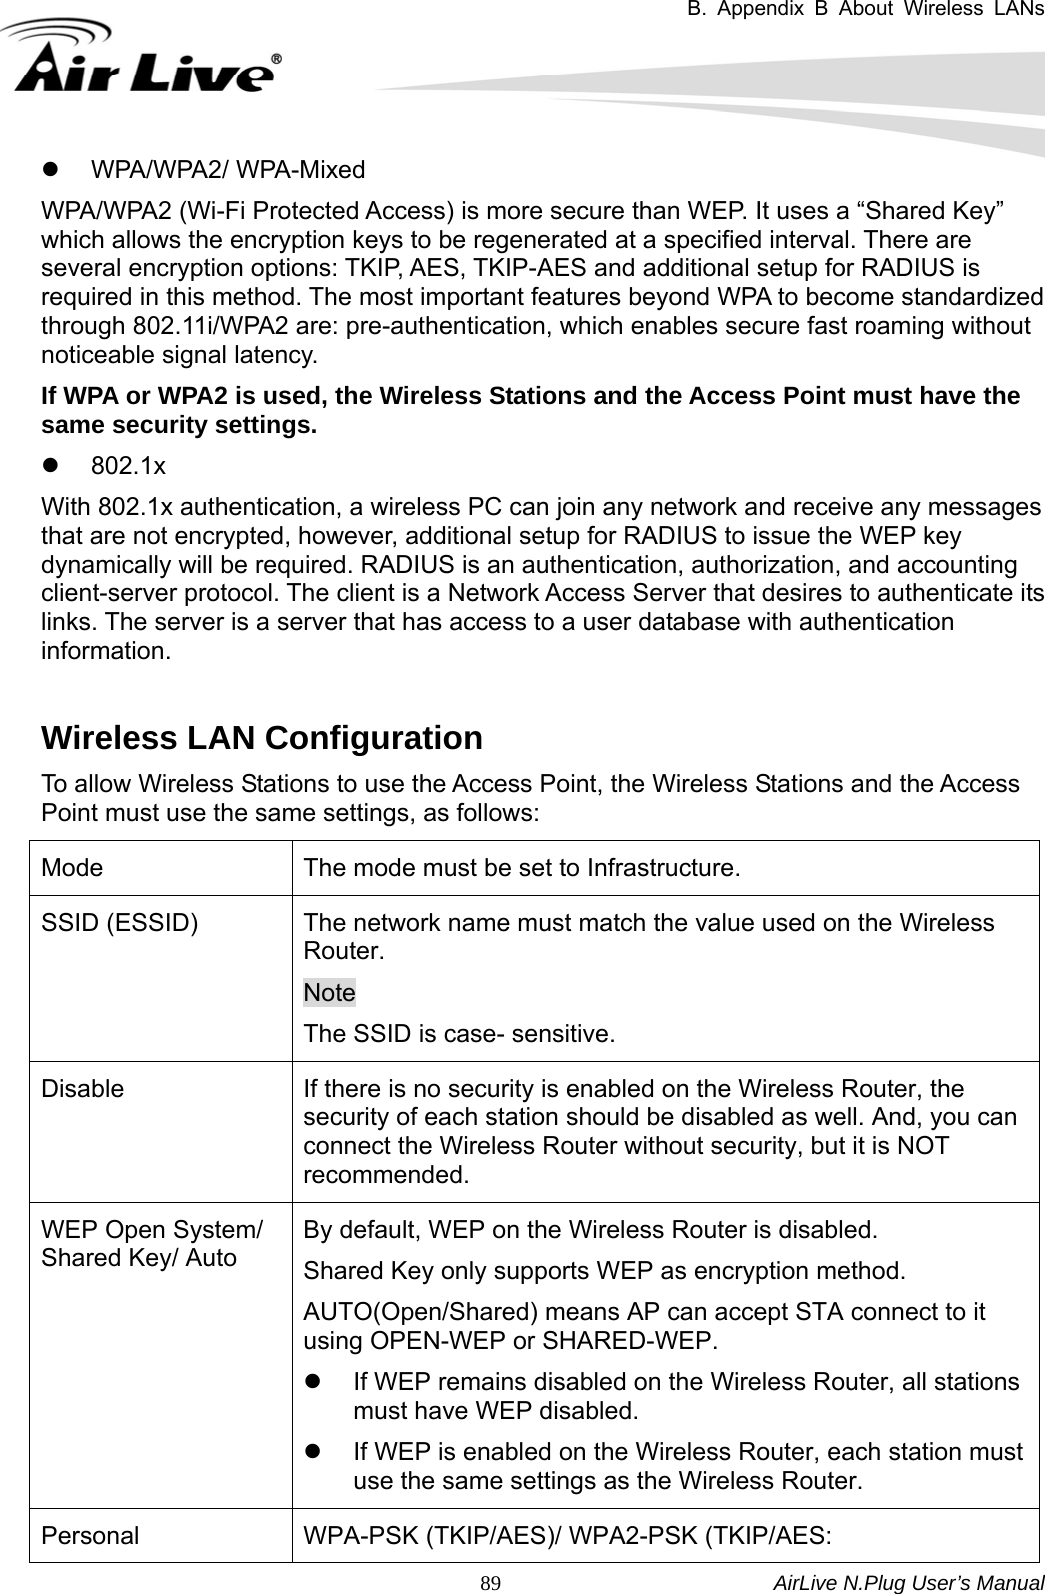 B. Appendix B About Wireless LANs    AirLive N.Plug User’s Manual  89z WPA/WPA2/ WPA-Mixed WPA/WPA2 (Wi-Fi Protected Access) is more secure than WEP. It uses a “Shared Key” which allows the encryption keys to be regenerated at a specified interval. There are several encryption options: TKIP, AES, TKIP-AES and additional setup for RADIUS is required in this method. The most important features beyond WPA to become standardized through 802.11i/WPA2 are: pre-authentication, which enables secure fast roaming without noticeable signal latency.     If WPA or WPA2 is used, the Wireless Stations and the Access Point must have the same security settings. z 802.1x With 802.1x authentication, a wireless PC can join any network and receive any messages that are not encrypted, however, additional setup for RADIUS to issue the WEP key dynamically will be required. RADIUS is an authentication, authorization, and accounting client-server protocol. The client is a Network Access Server that desires to authenticate its links. The server is a server that has access to a user database with authentication information.   Wireless LAN Configuration To allow Wireless Stations to use the Access Point, the Wireless Stations and the Access Point must use the same settings, as follows:   Mode  The mode must be set to Infrastructure. SSID (ESSID)  The network name must match the value used on the Wireless Router.  Note The SSID is case- sensitive. Disable  If there is no security is enabled on the Wireless Router, the security of each station should be disabled as well. And, you can connect the Wireless Router without security, but it is NOT recommended. WEP Open System/ Shared Key/ Auto By default, WEP on the Wireless Router is disabled.   Shared Key only supports WEP as encryption method.   AUTO(Open/Shared) means AP can accept STA connect to it using OPEN-WEP or SHARED-WEP.   z  If WEP remains disabled on the Wireless Router, all stations must have WEP disabled.   z  If WEP is enabled on the Wireless Router, each station must use the same settings as the Wireless Router. Personal WPA-PSK (TKIP/AES)/ WPA2-PSK (TKIP/AES:   